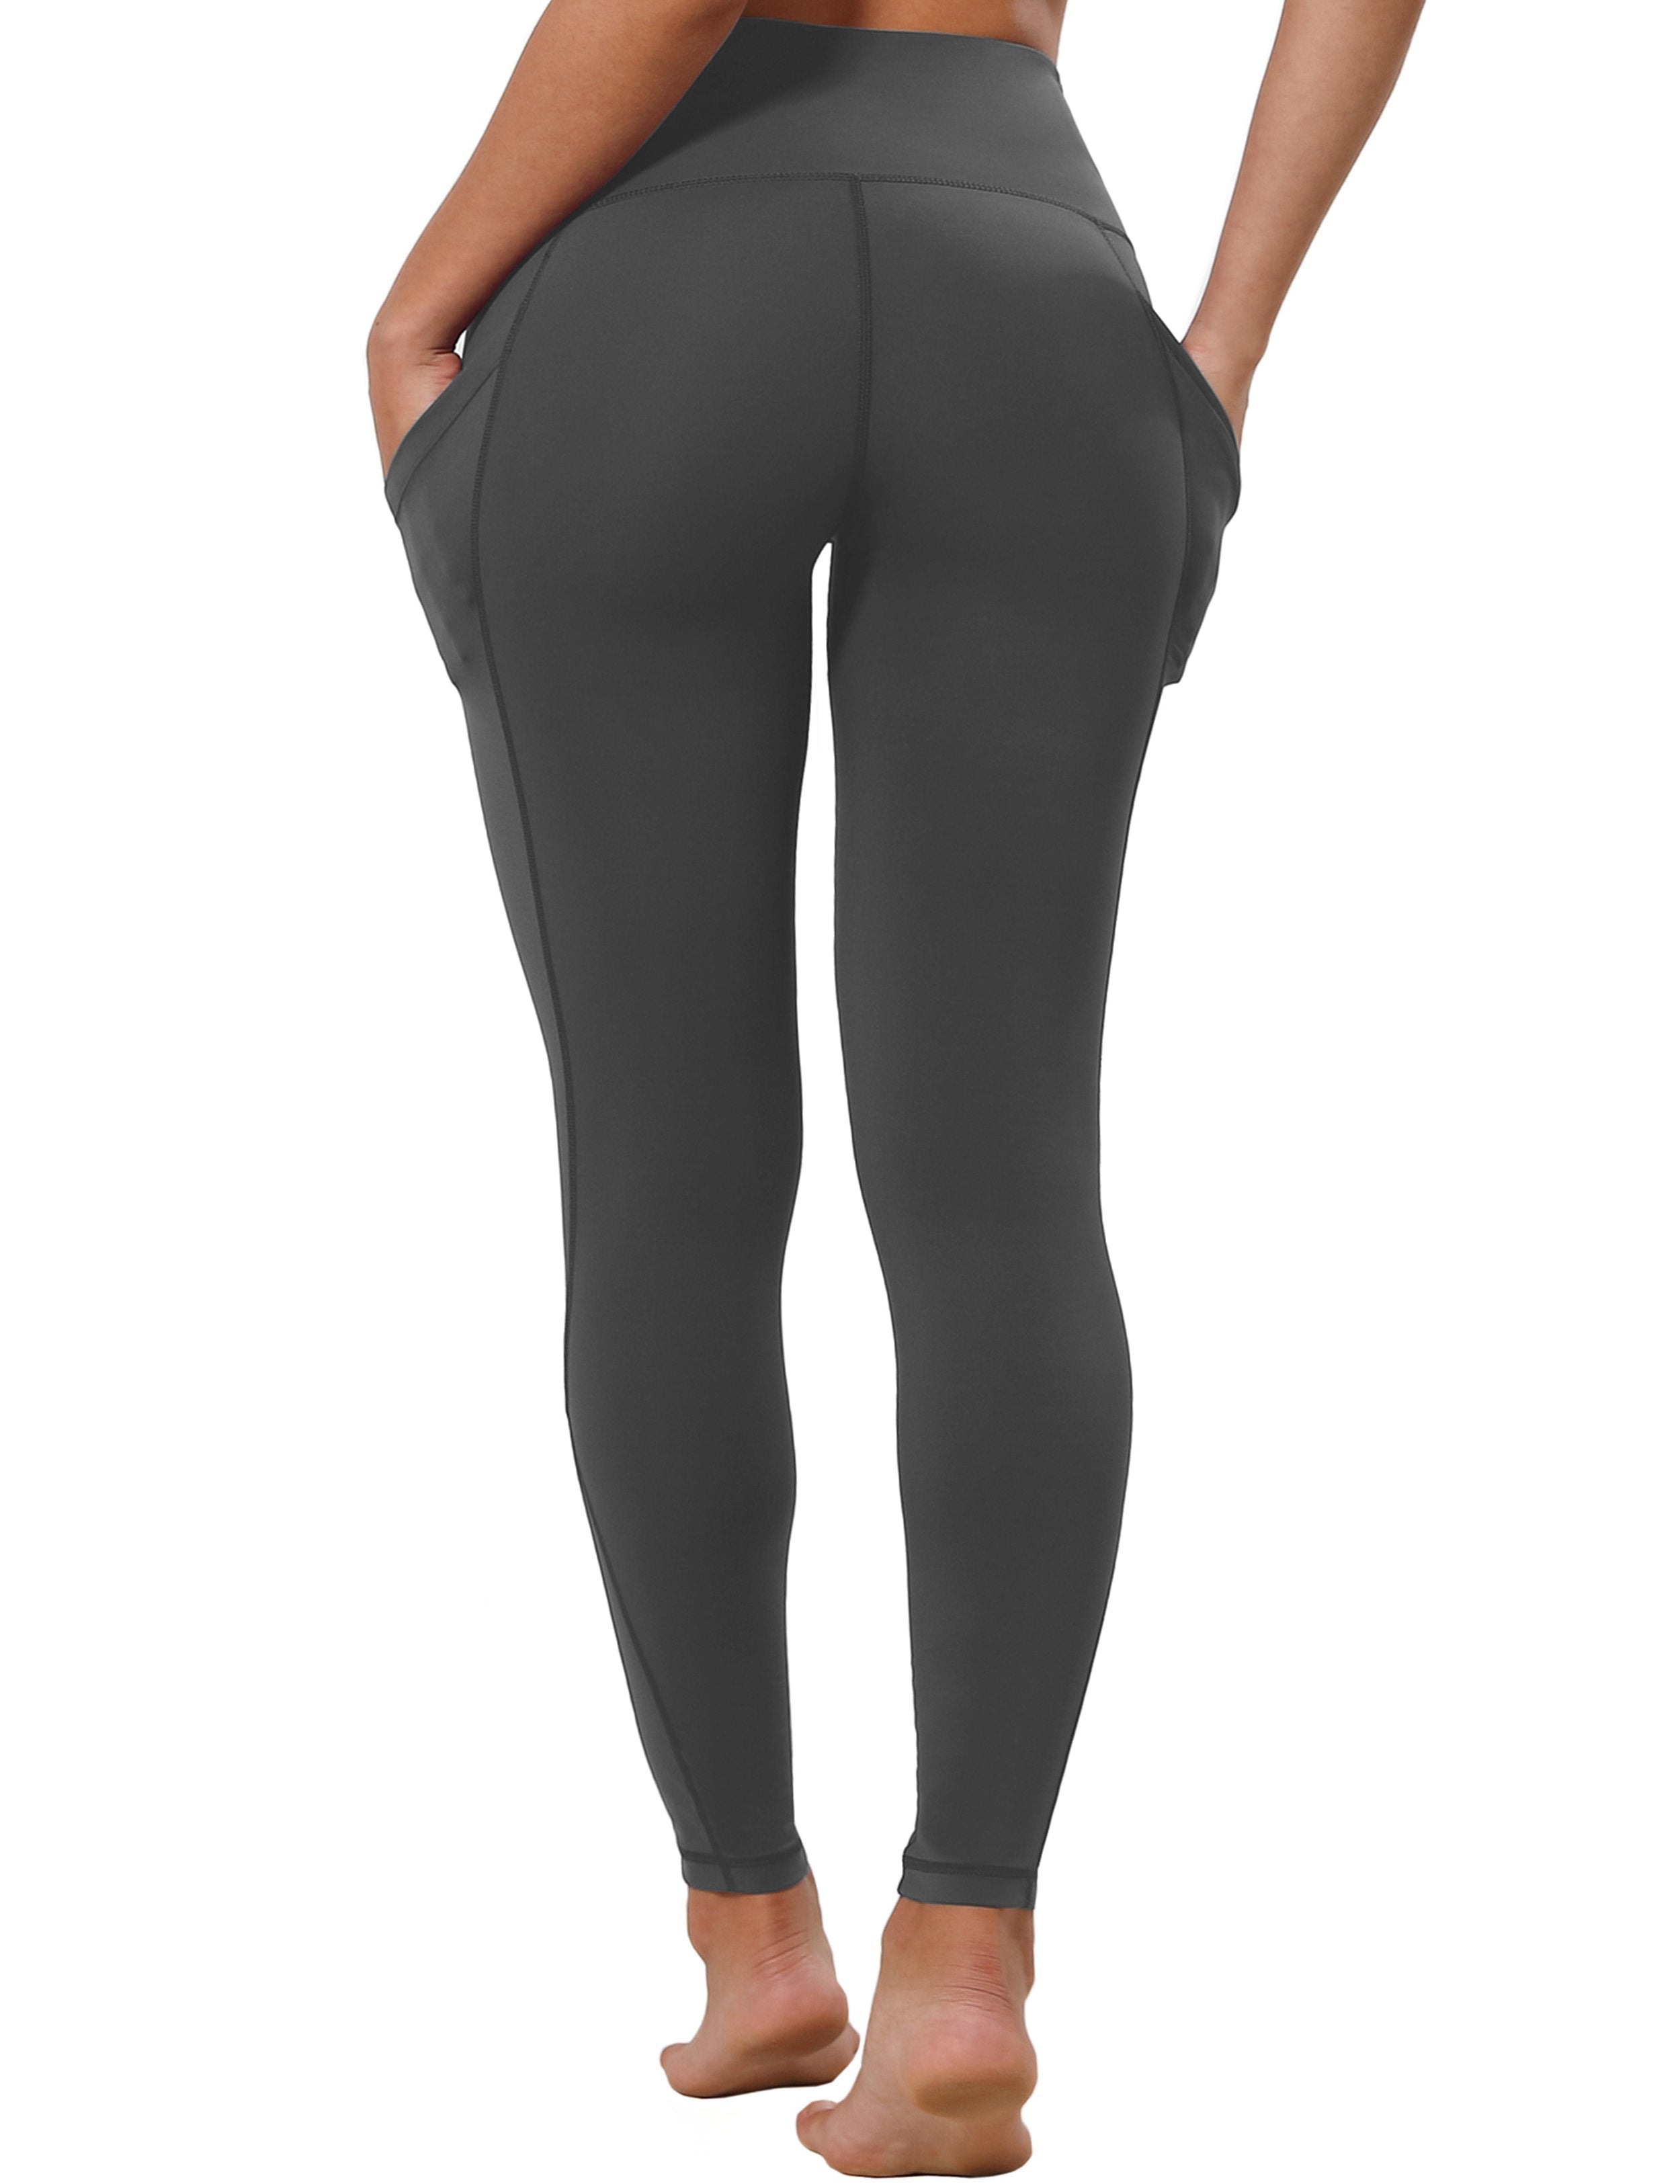 High Waist Side Pockets yogastudio Pants shadowcharcoal 75% Nylon, 25% Spandex Fabric doesn't attract lint easily 4-way stretch No see-through Moisture-wicking Tummy control Inner pocket